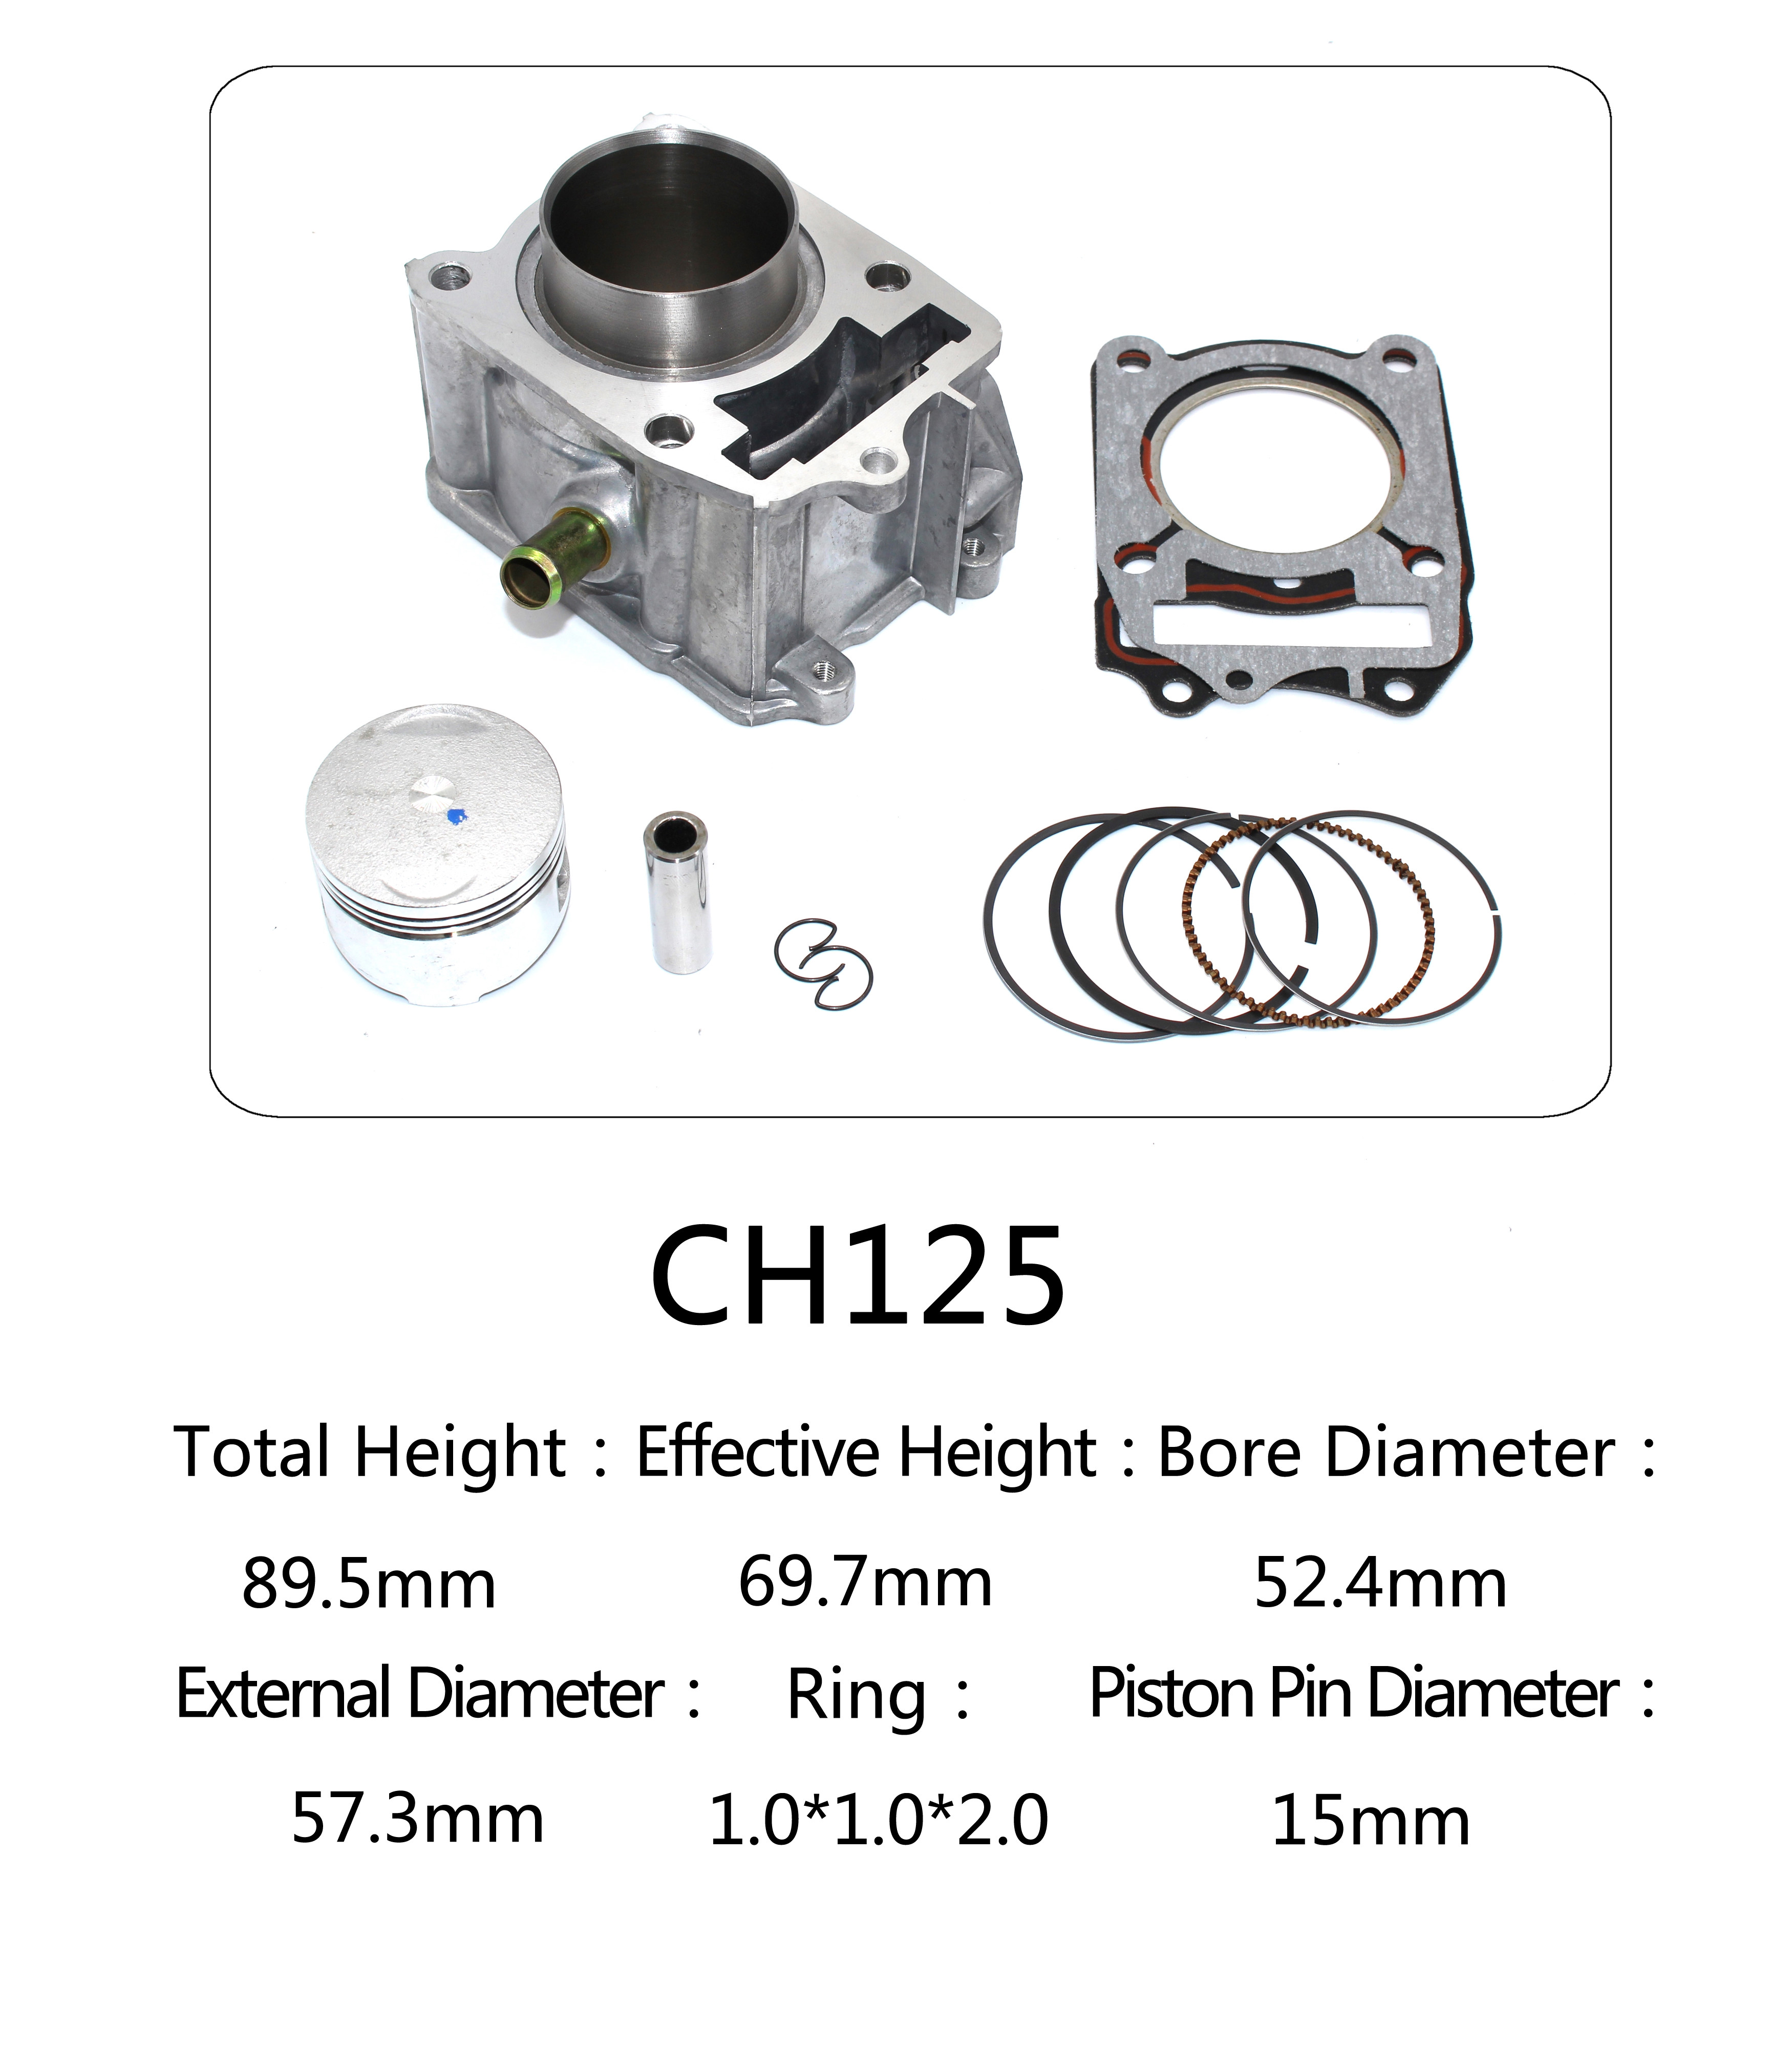 CH 125 Honda 125cc Water Cooled Cylinder Kit For Motorcycle Engine Parts